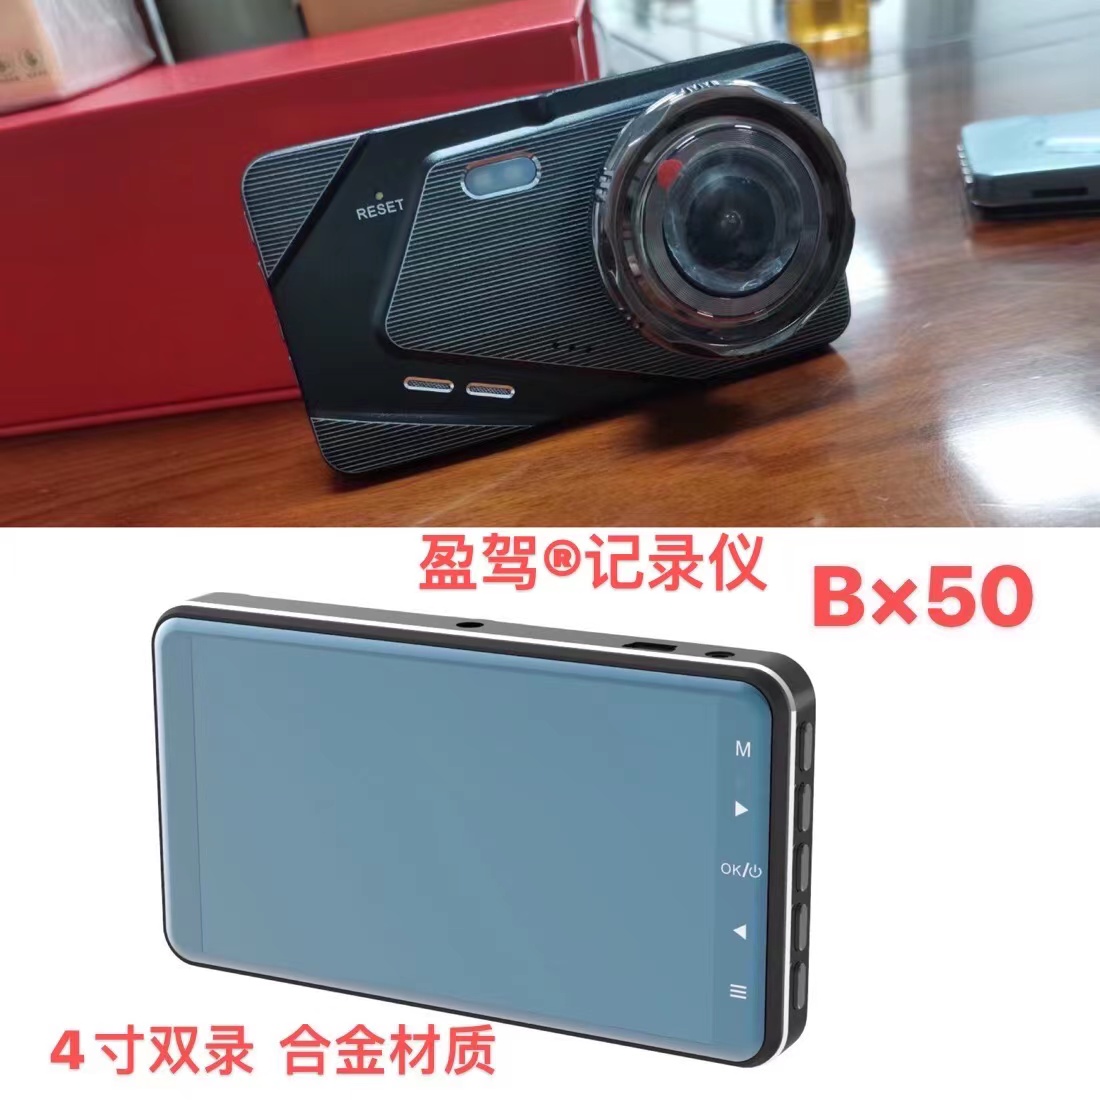 Vehicle camera --YJ brand -- new product -- BX50 is introduced